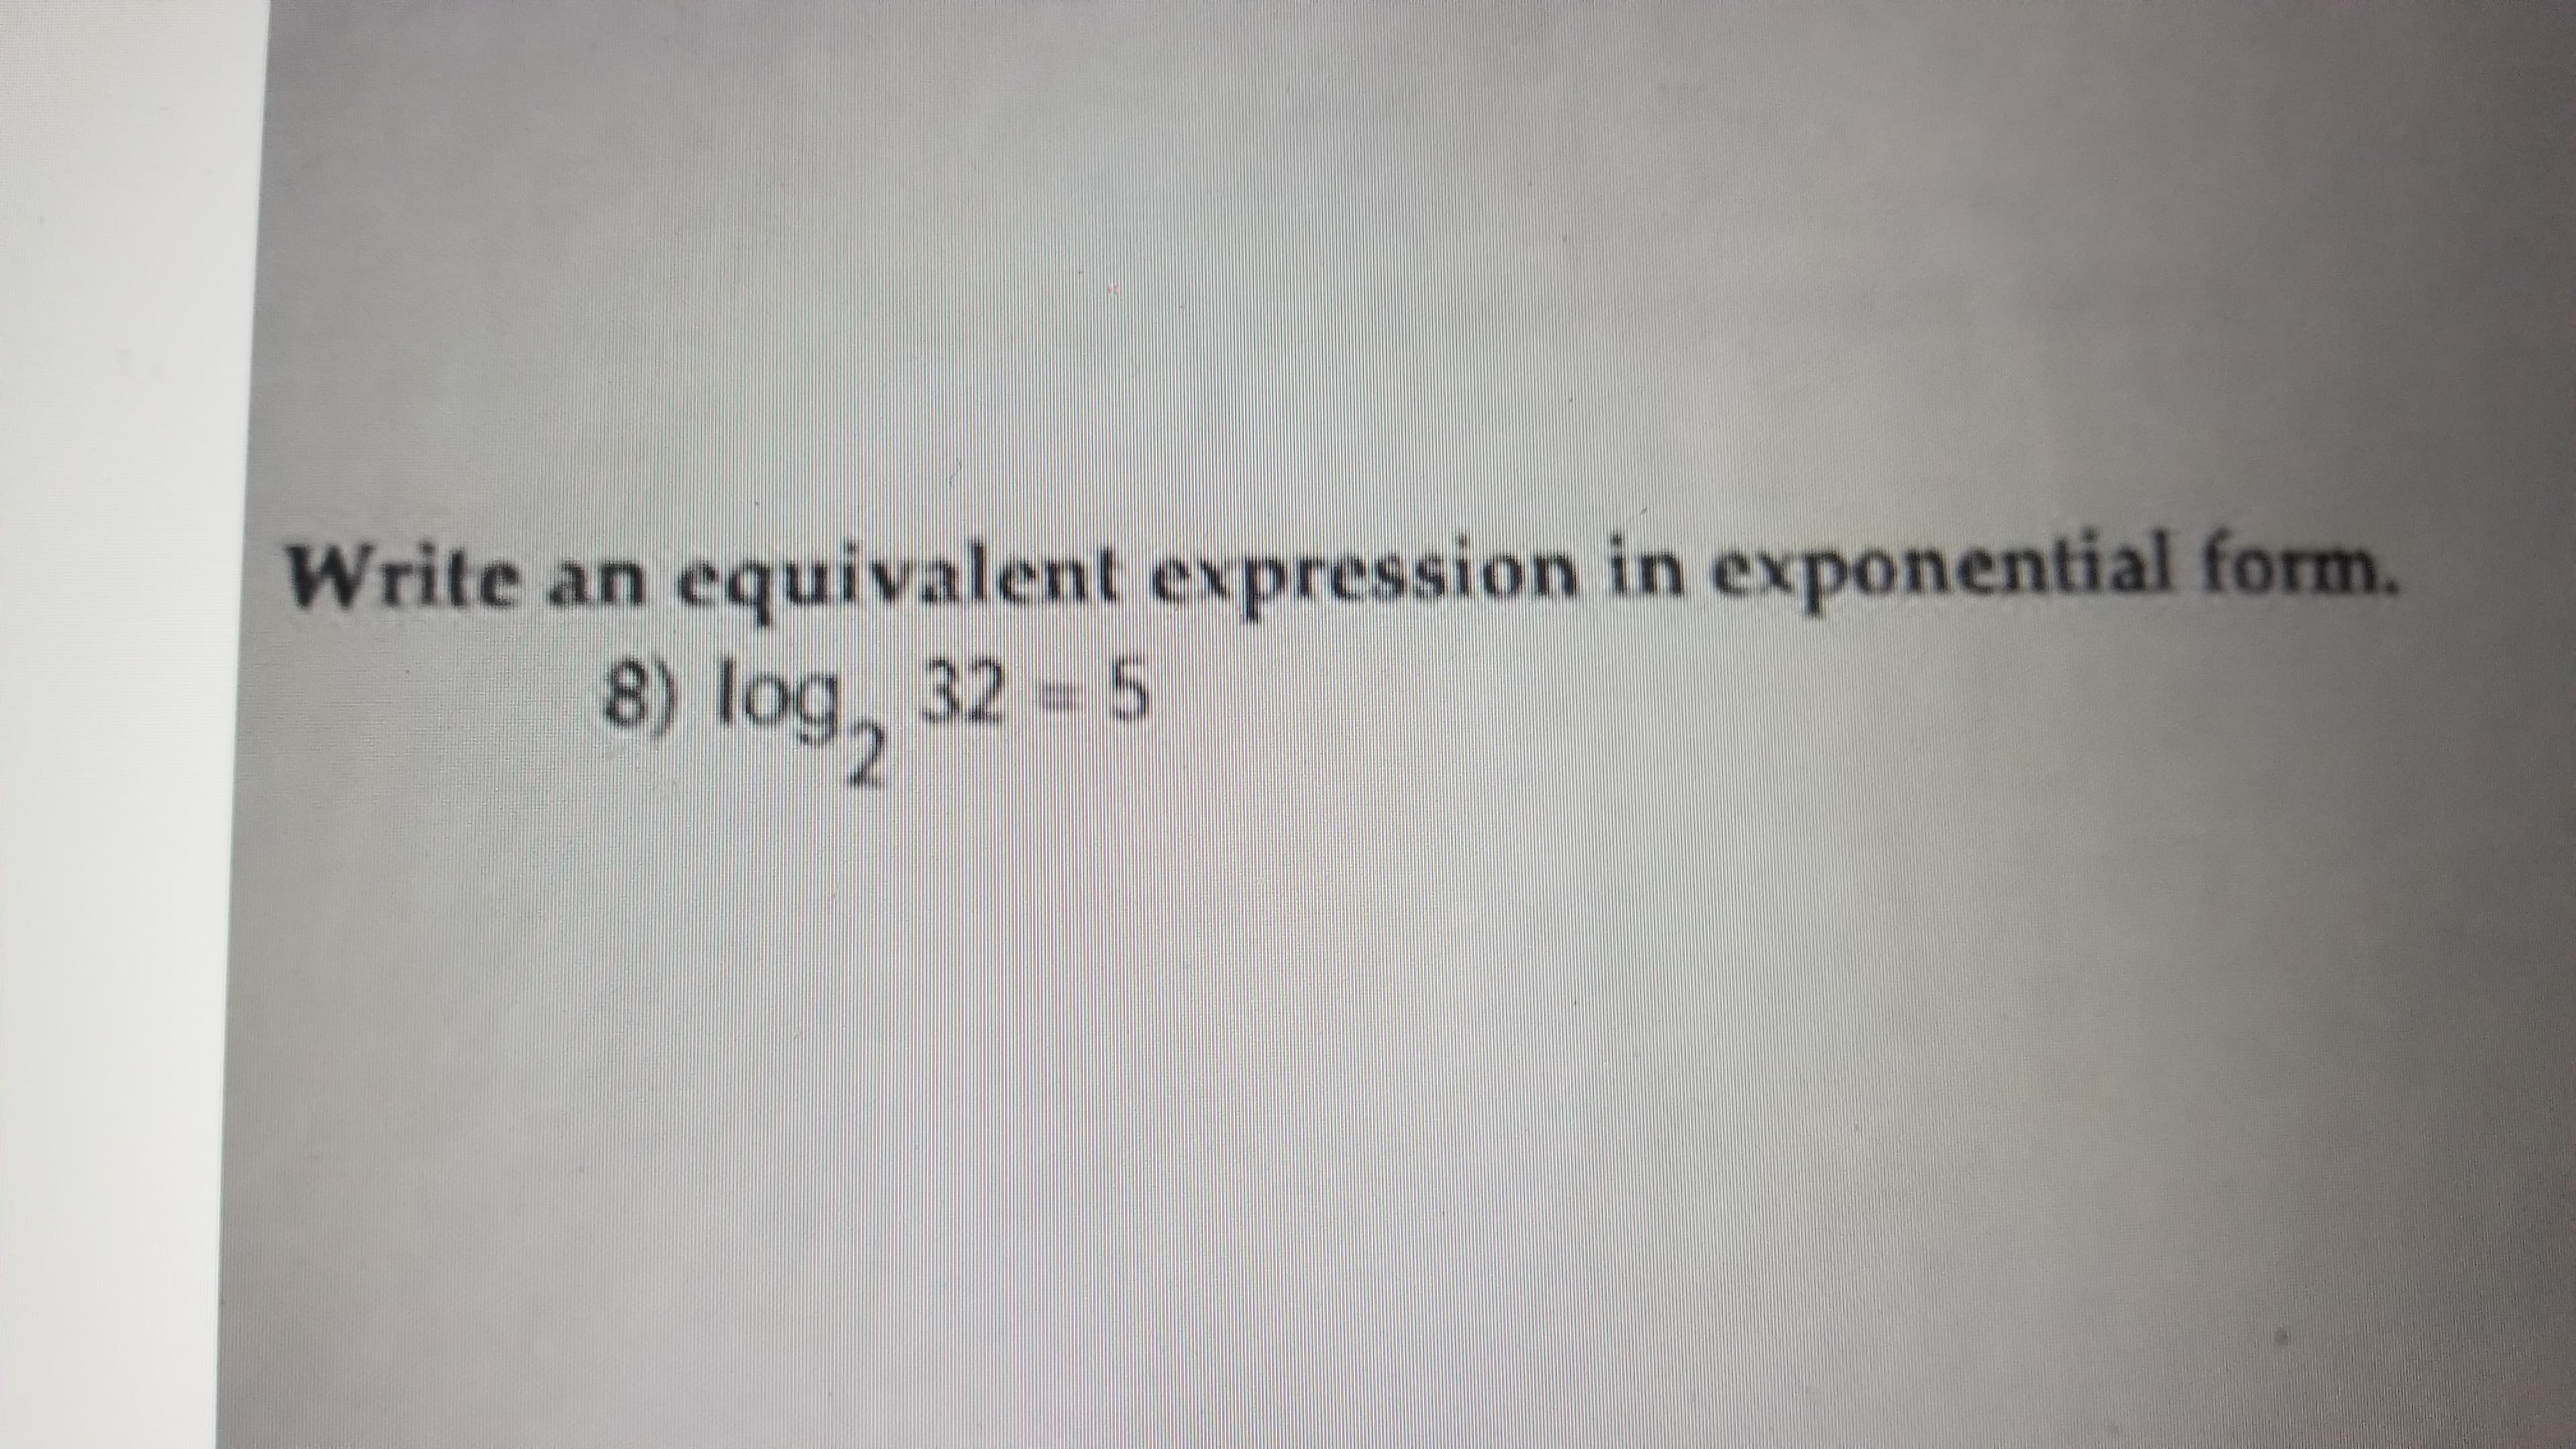 Write an equivalent expression in exponential form.
8) log, 32 - 5
